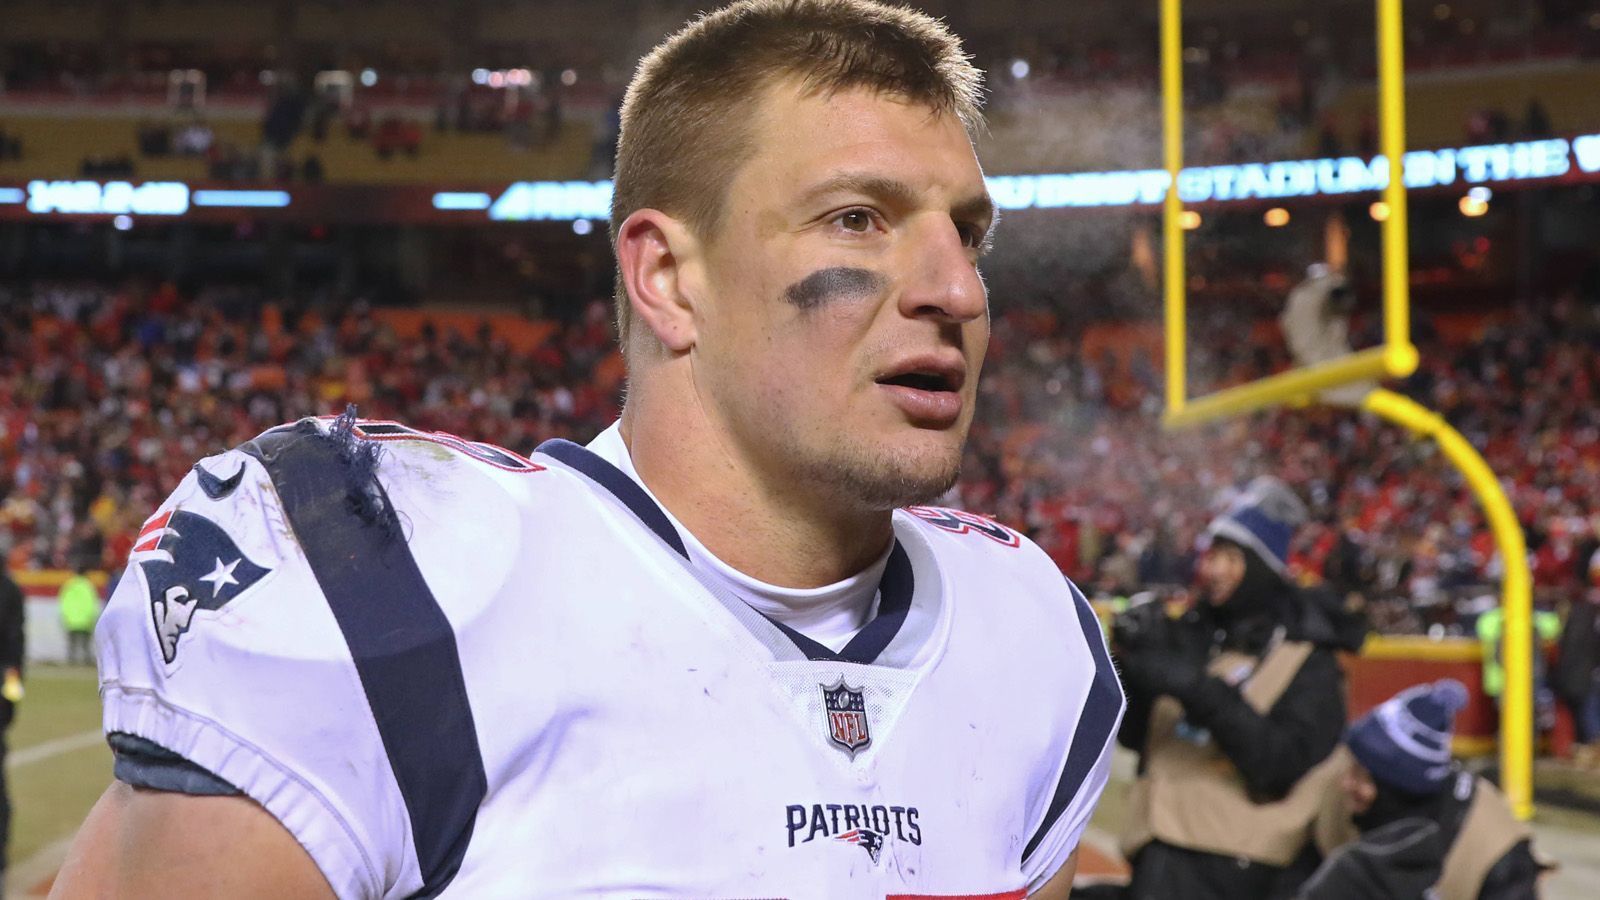 
                <strong>Platz 17: Rob Gronkowski</strong><br>
                Team: New England PatriotsPosition: Tight End (Karriere beendet)
              